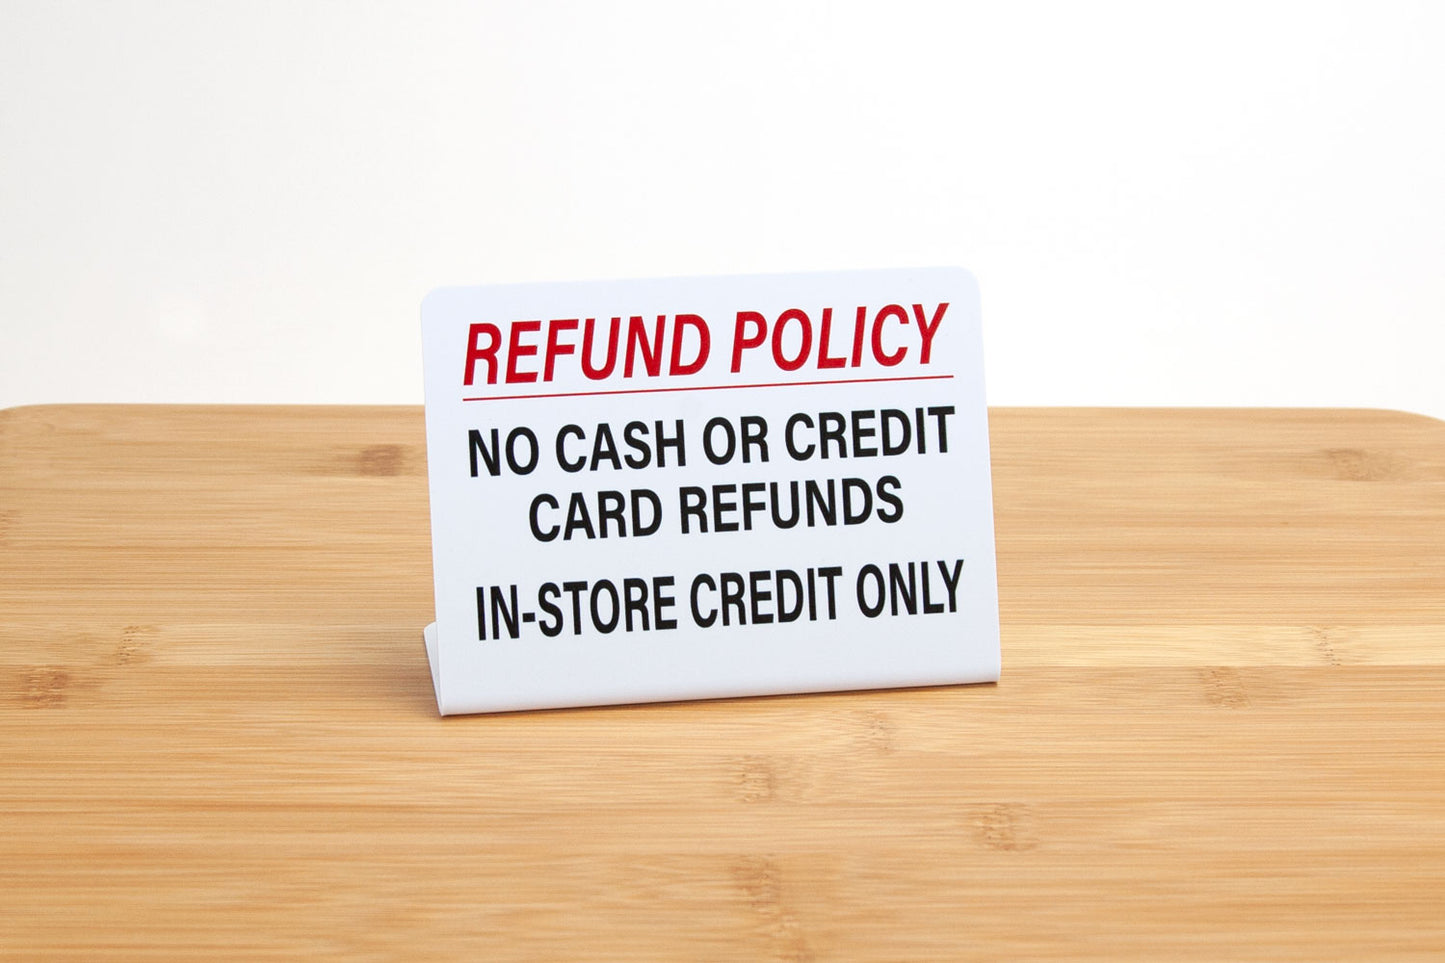 Are refunds only provided as in store credit?